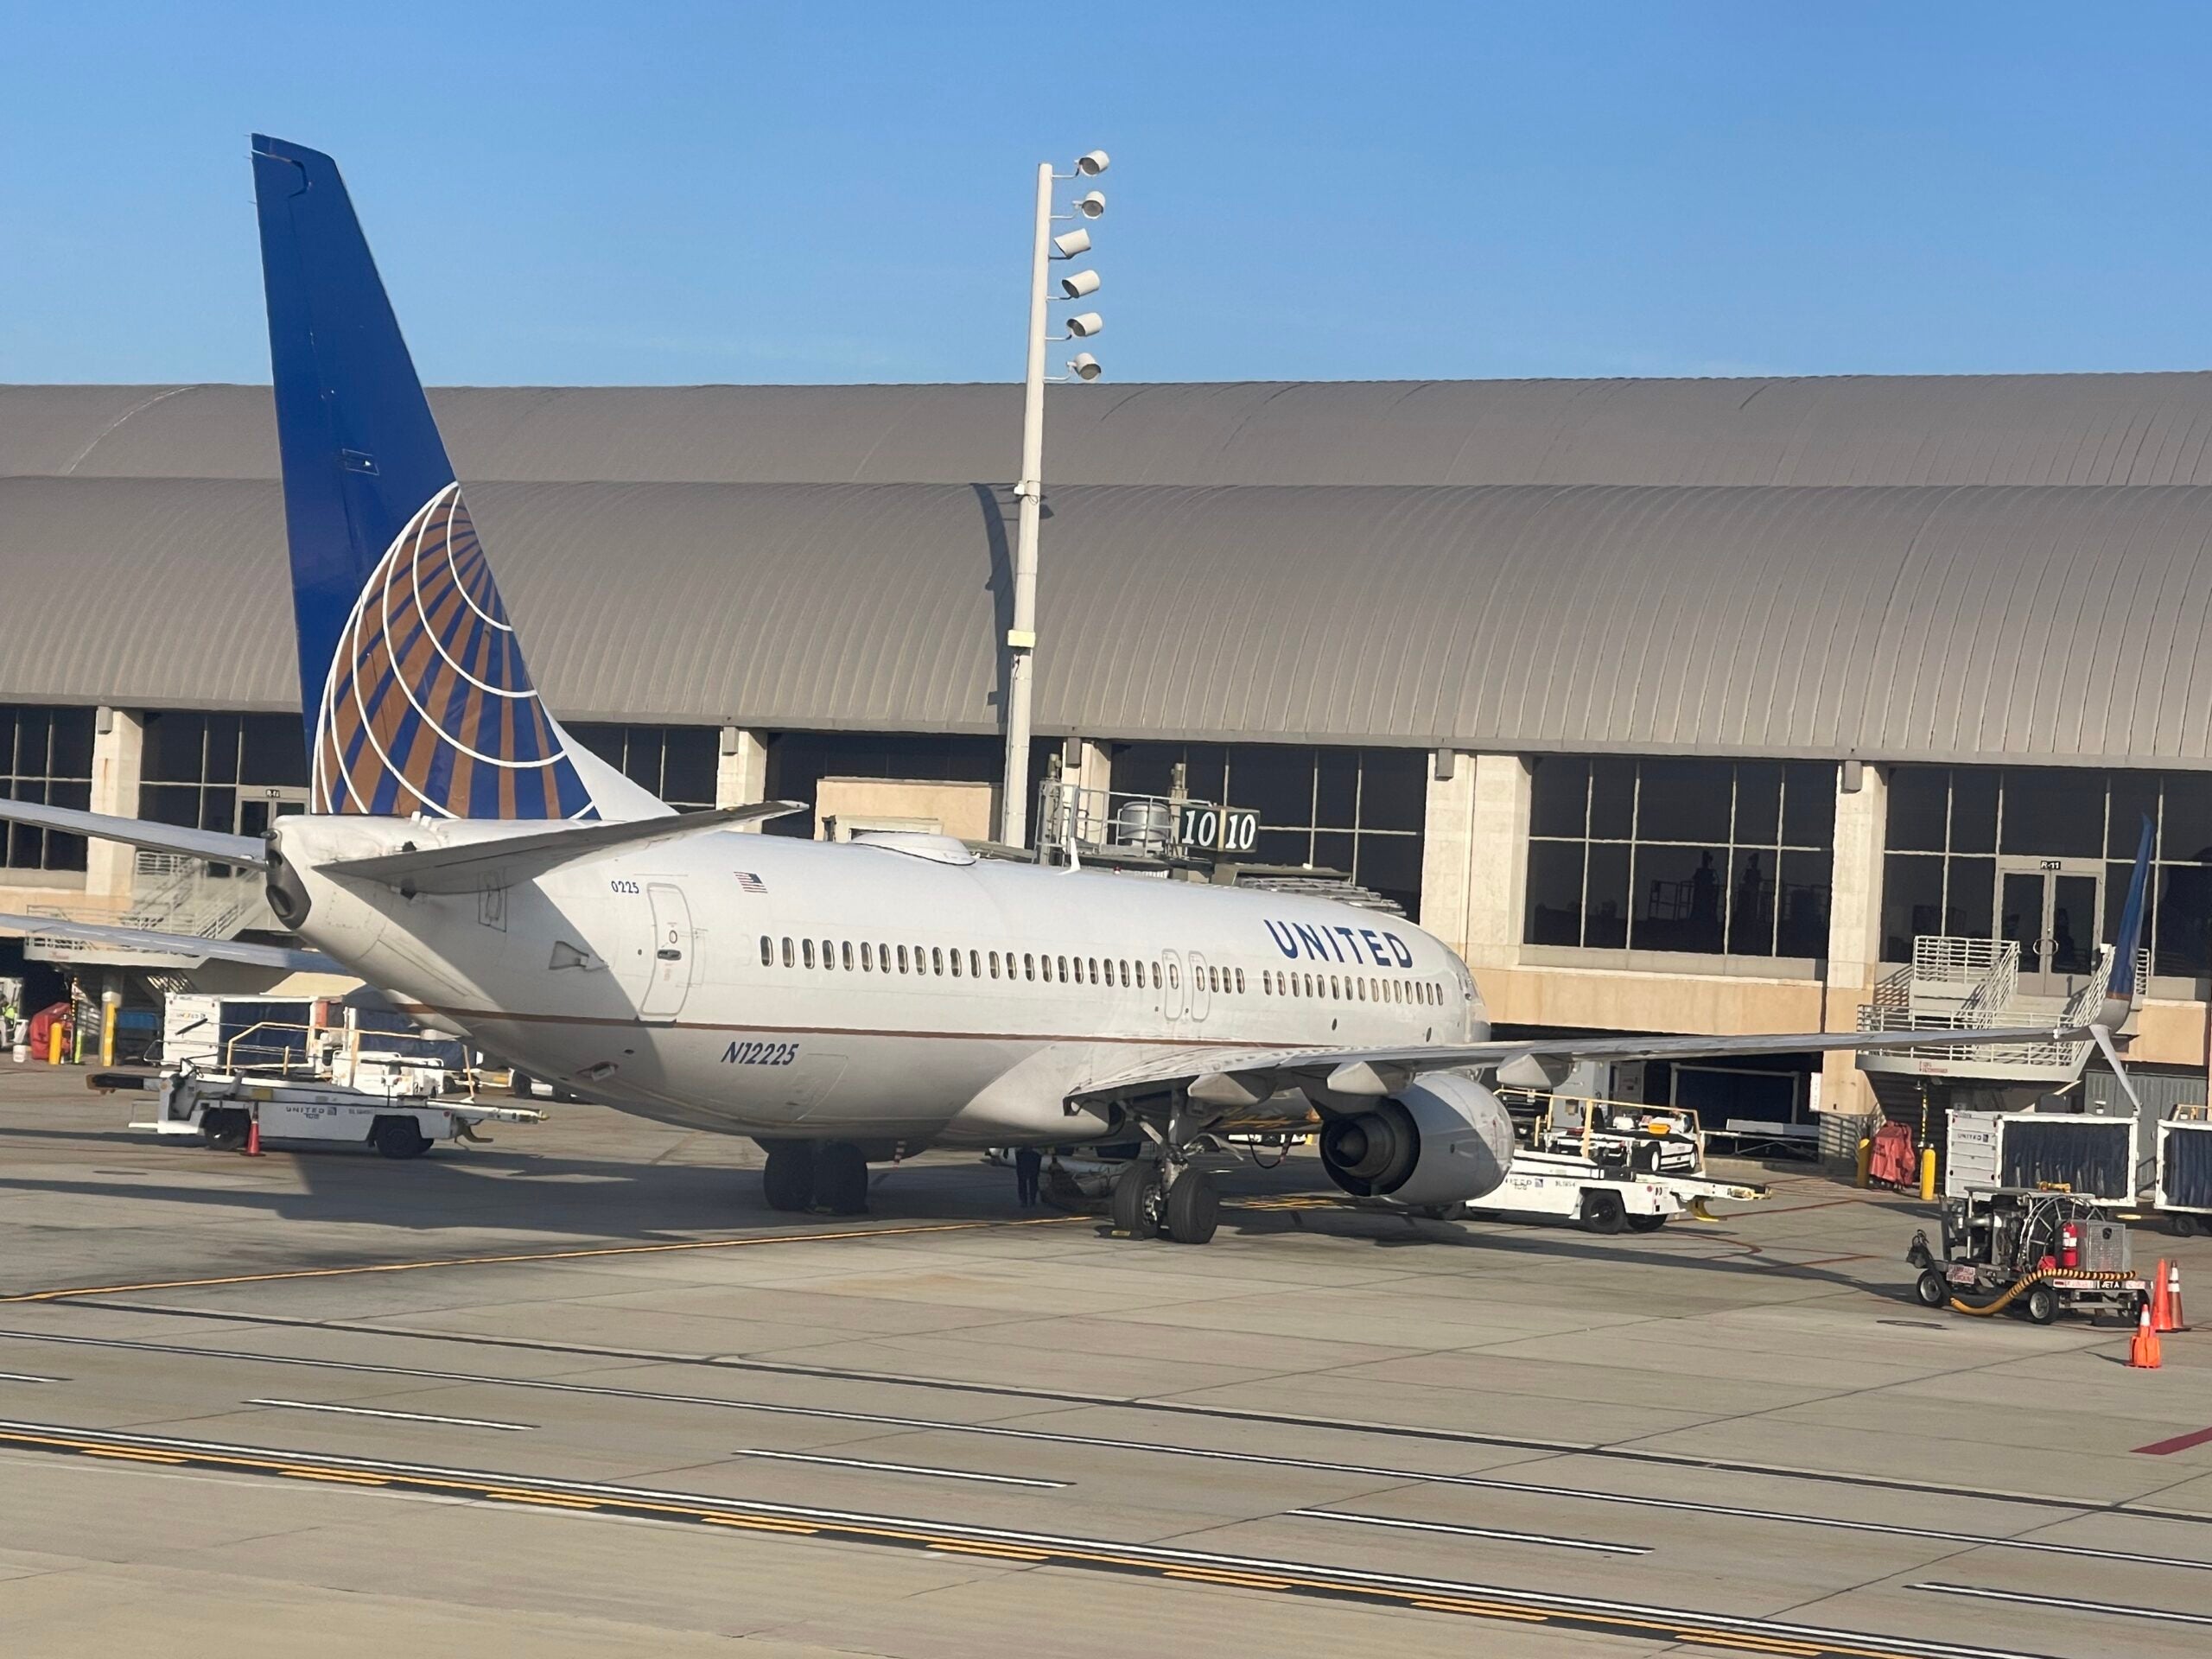 United Airlines Boeing 737-800 at gate